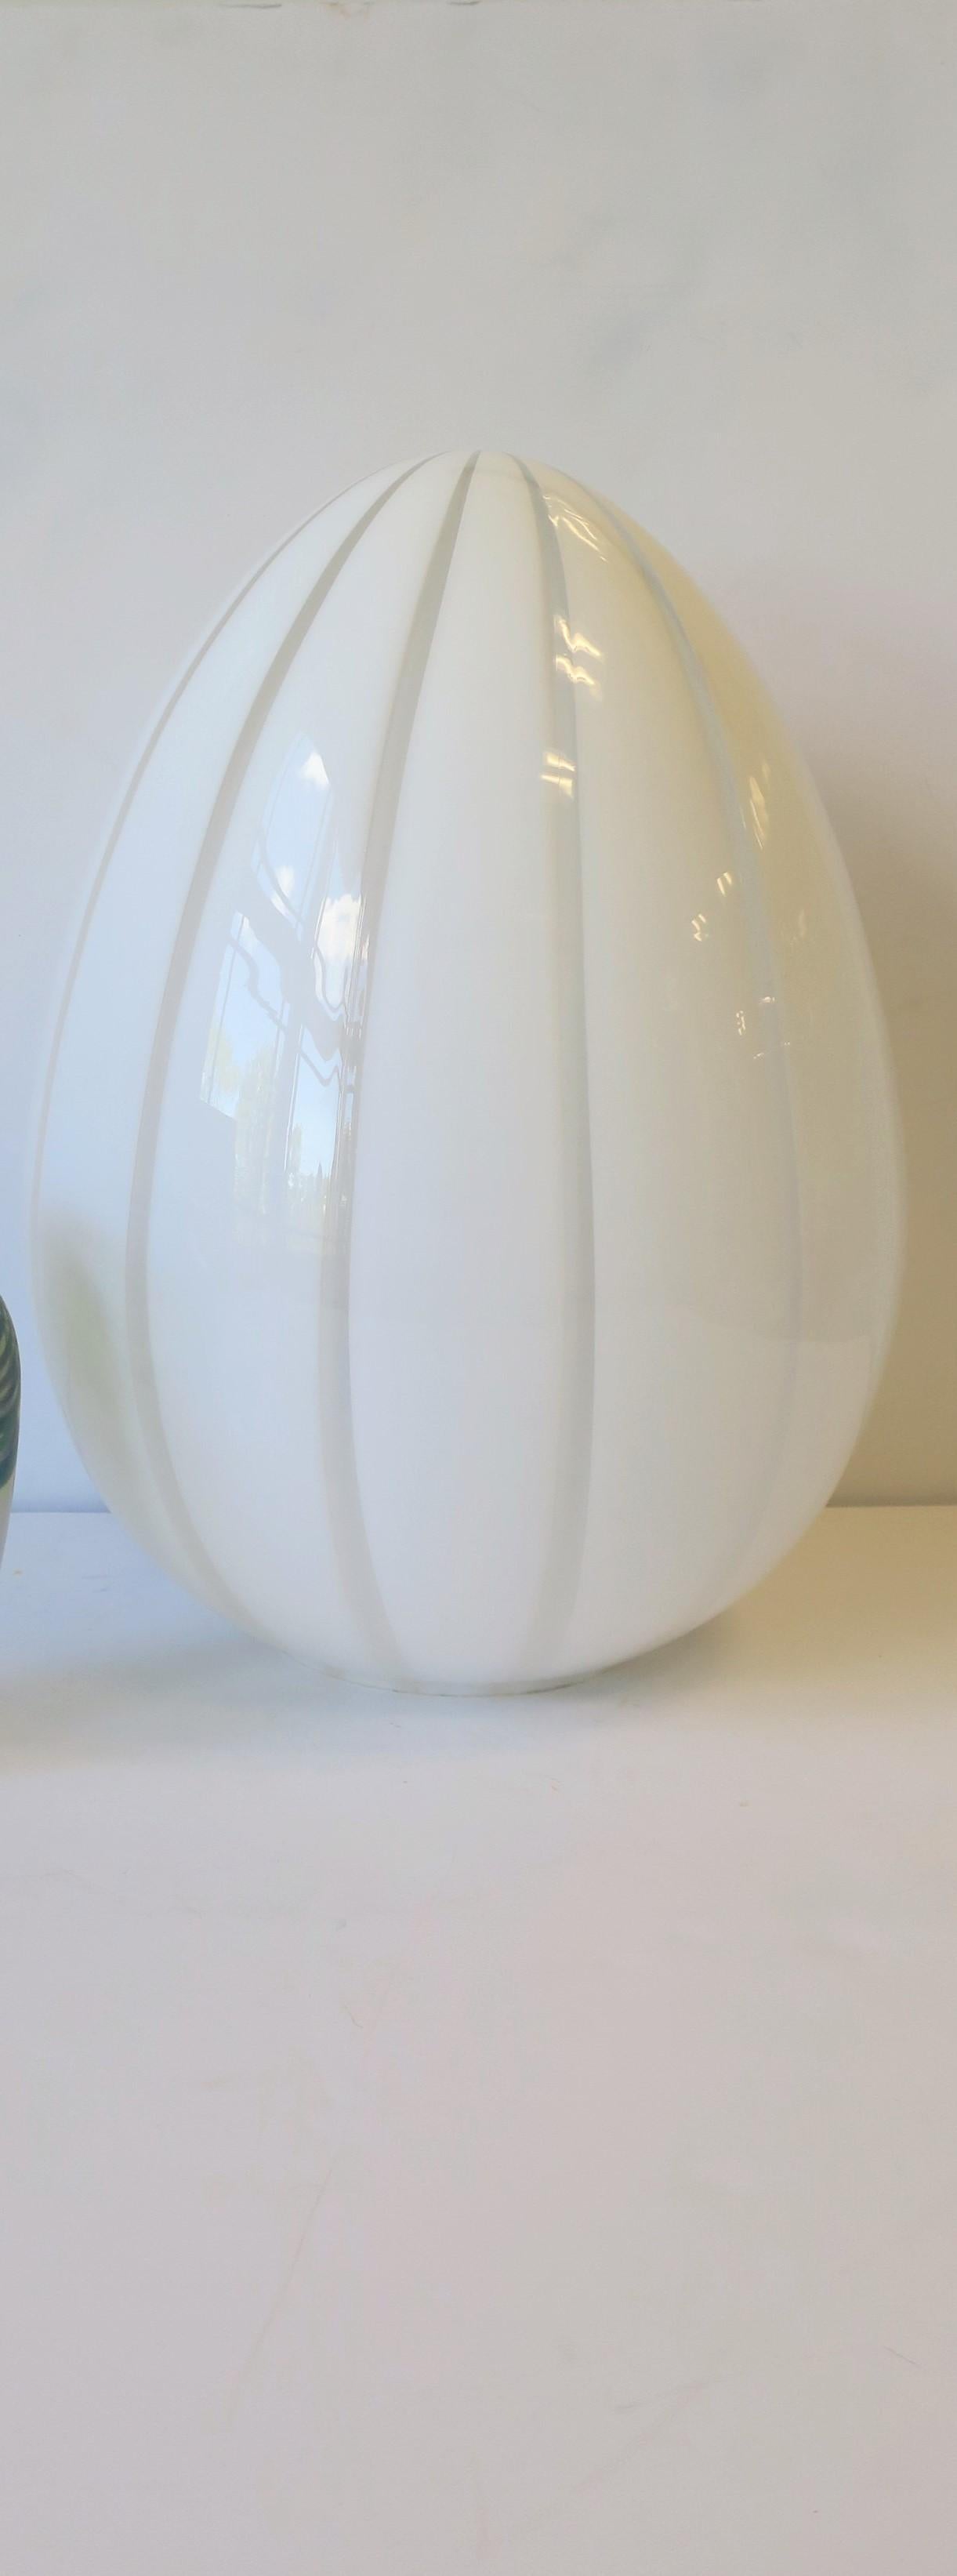 A beautiful Italian '70s Modern 'Vetri' Murano white and translucent art glass egg-shape table lamp, circa late-20th century, 1970s, Italy. Lamp is on a 'dimmer' switch offering various levels of light as shown in image #12. Lamp is illuminated in